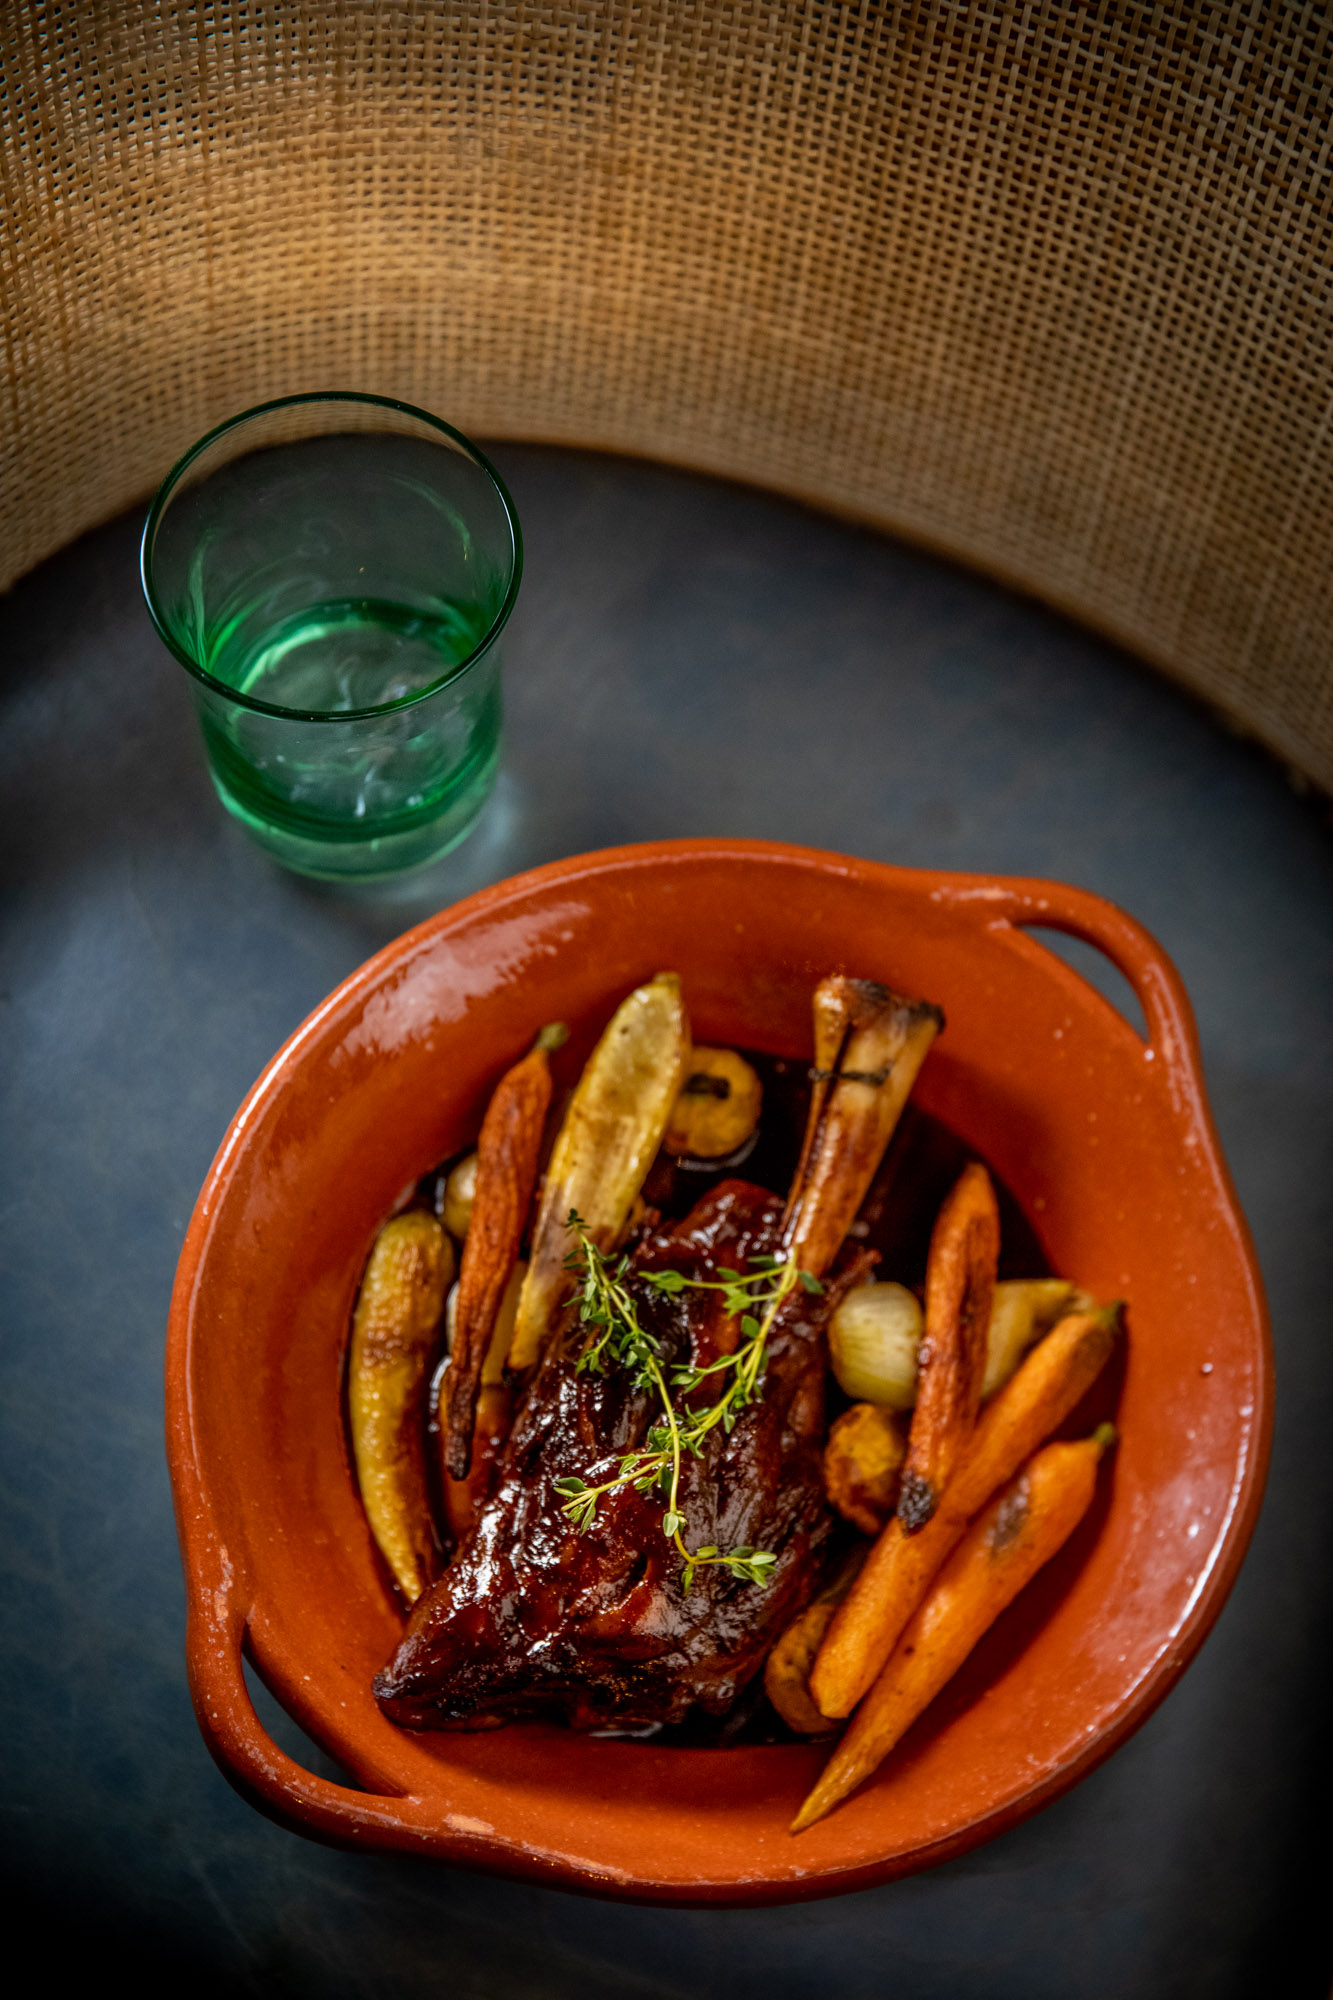 Braised meat and carrots in a subdued setting